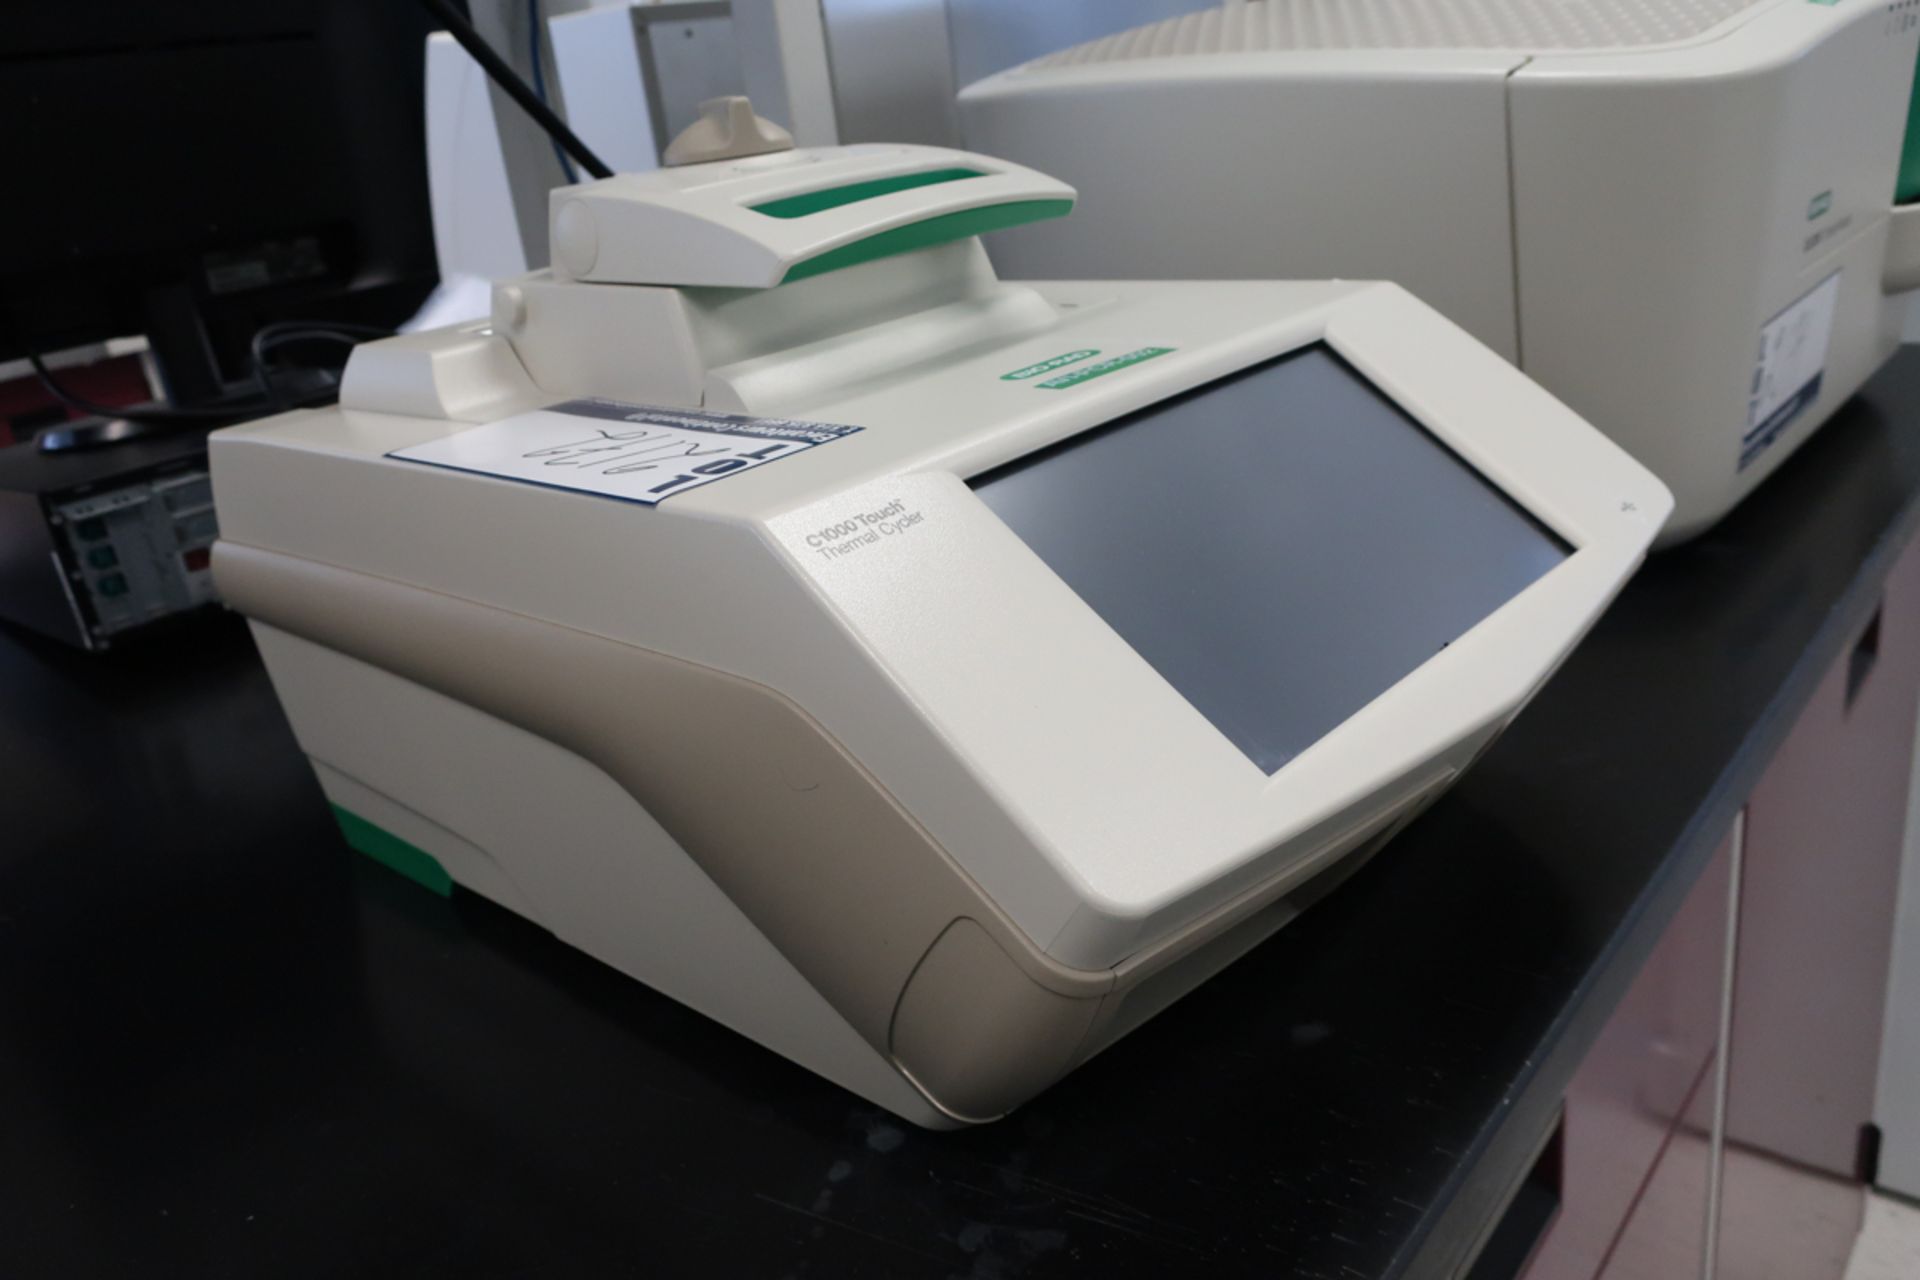 BIO-RAD C1000 TOUCH THERMAL CYCLER, S/N: C7033292